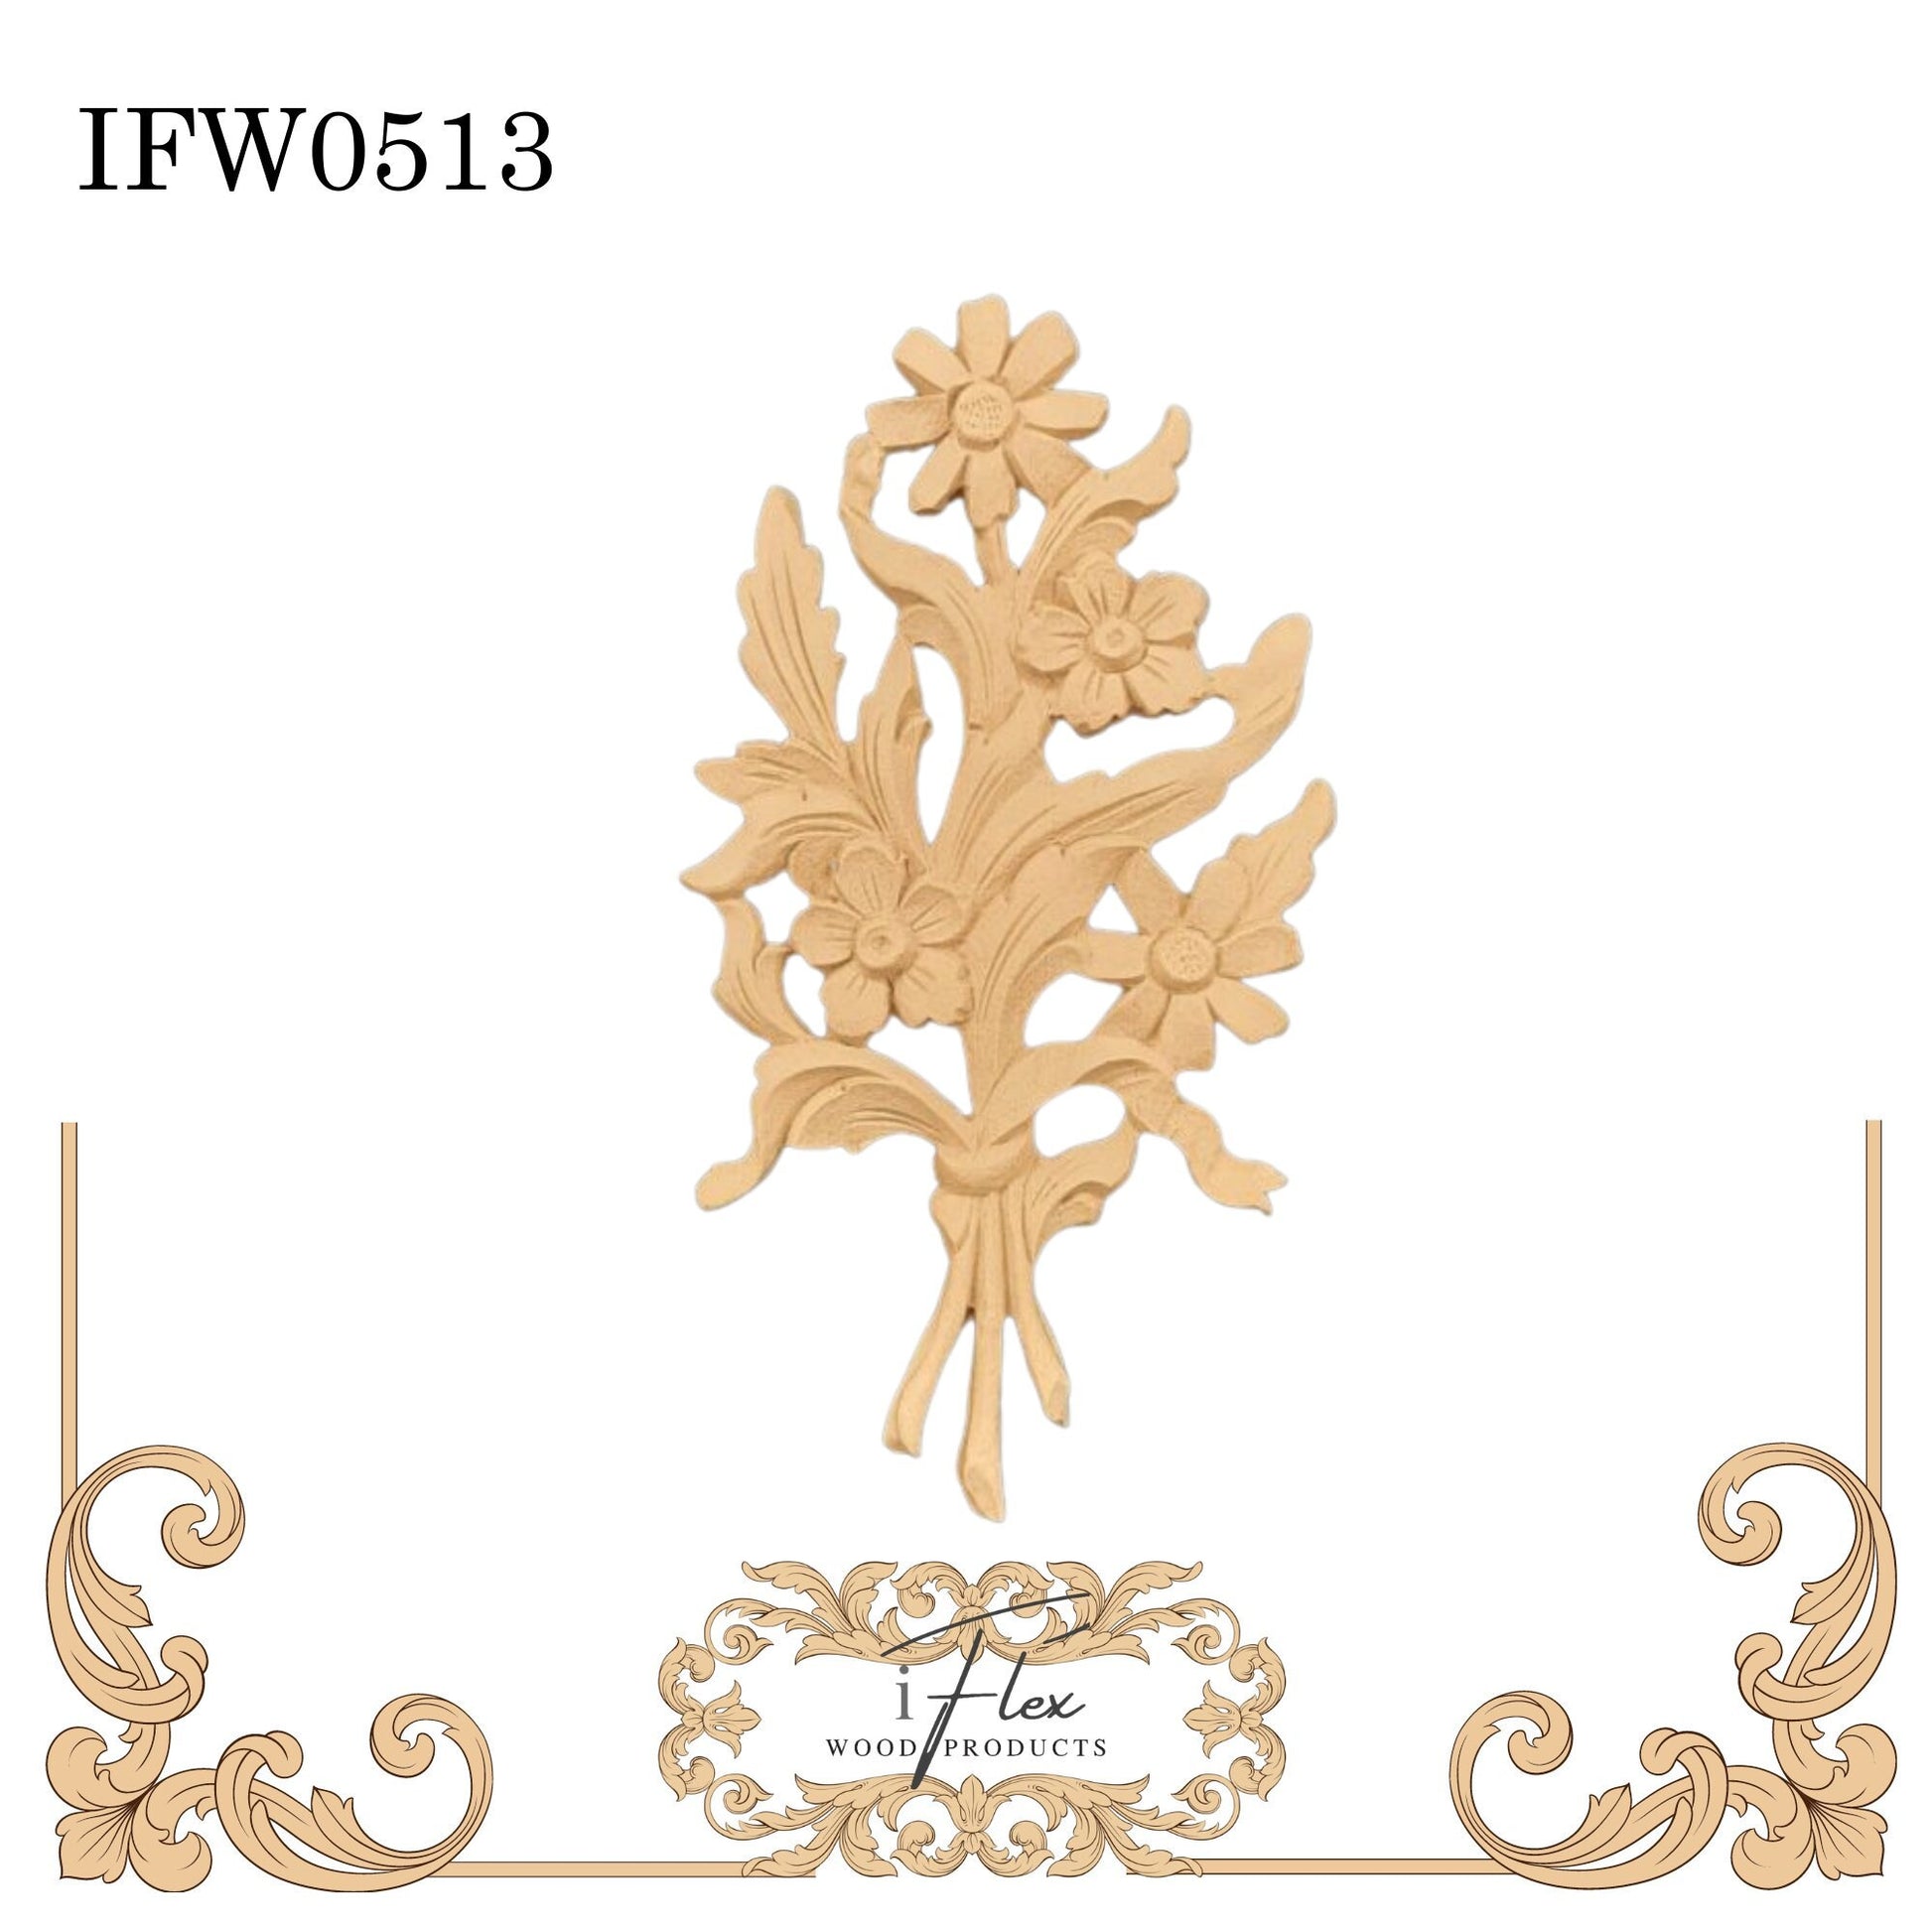 IFW 0513  iFlex Wood Products Flower bendable mouldings, flexible, wooden appliques